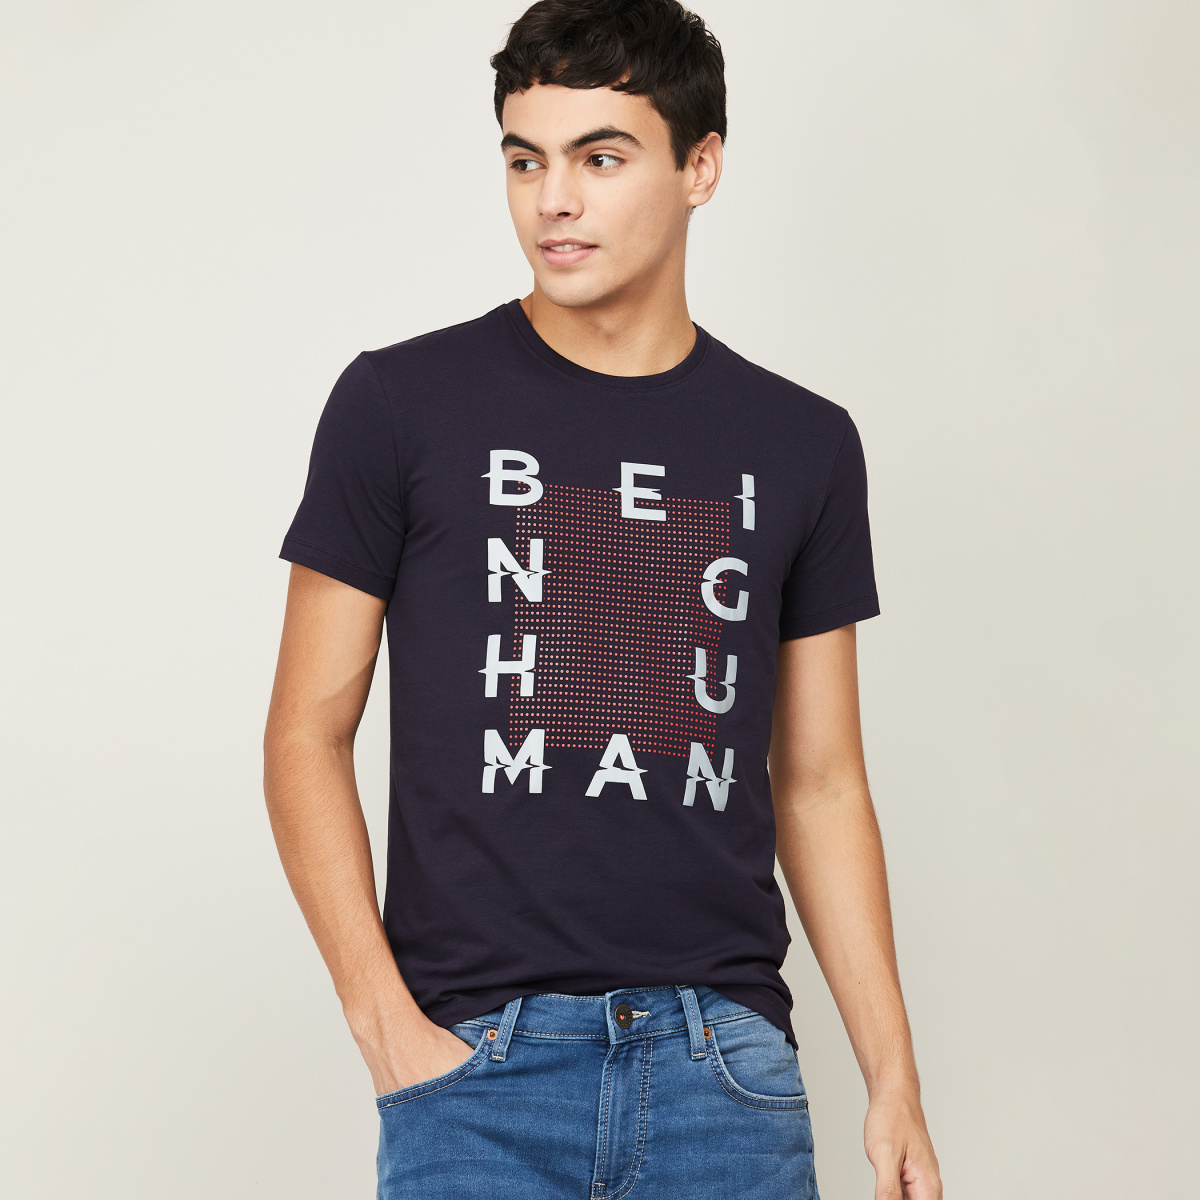 Classy yet sassy, our new shirt... - Being Human Clothing | Facebook